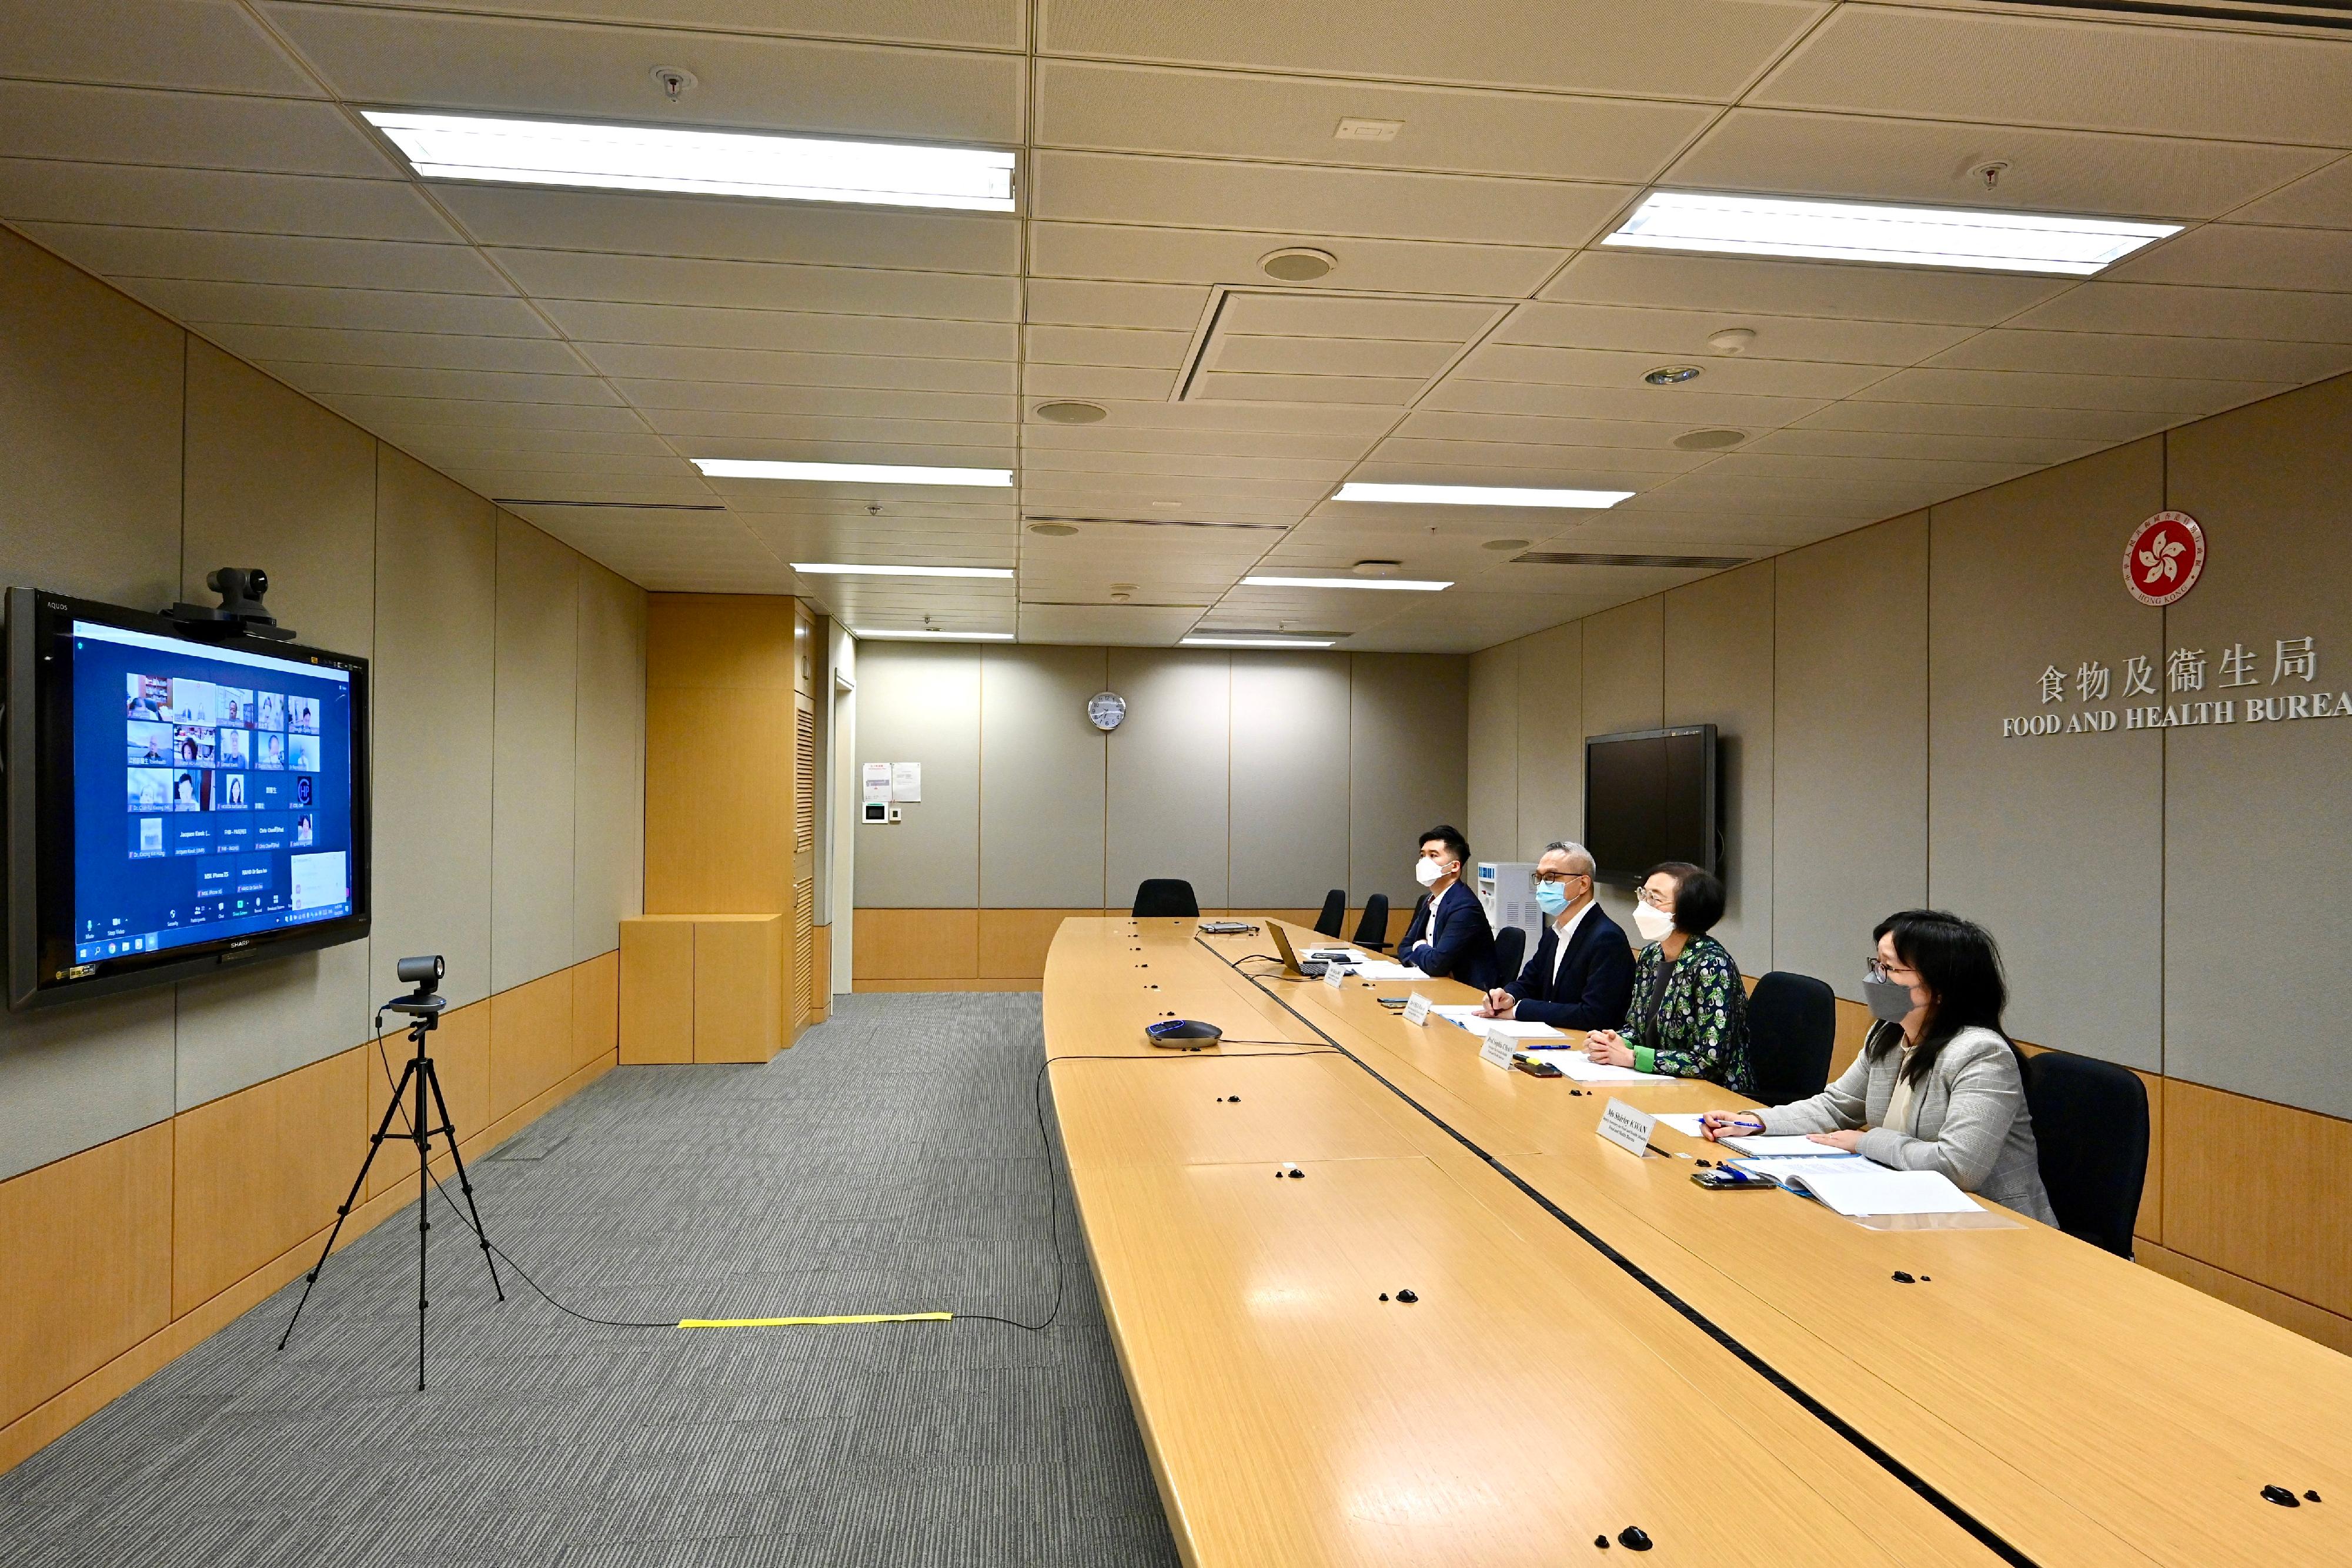 The Secretary for Food and Health, Professor Sophia Chan (second right), had a meeting with over 20 representatives of the medical and health sector from various healthcare professional bodies, medical organisations and medical institutions via video conferencing today (April 14) to appeal to the private healthcare sector to continue to unite in the fight against the epidemic by helping to treat COVID-19 patients and getting prepared for the phased resumption of face-to-face classes in schools, so as to cope with the possible rebound in the number of confirmed cases of COVID-19 after the resumption of face-to-face classes. The Under Secretary for Food and Health, Dr Chui Tak-yi (second left); and the Deputy Secretary for Food and Health (Health), Ms Shirley Kwan (first right), also attended.